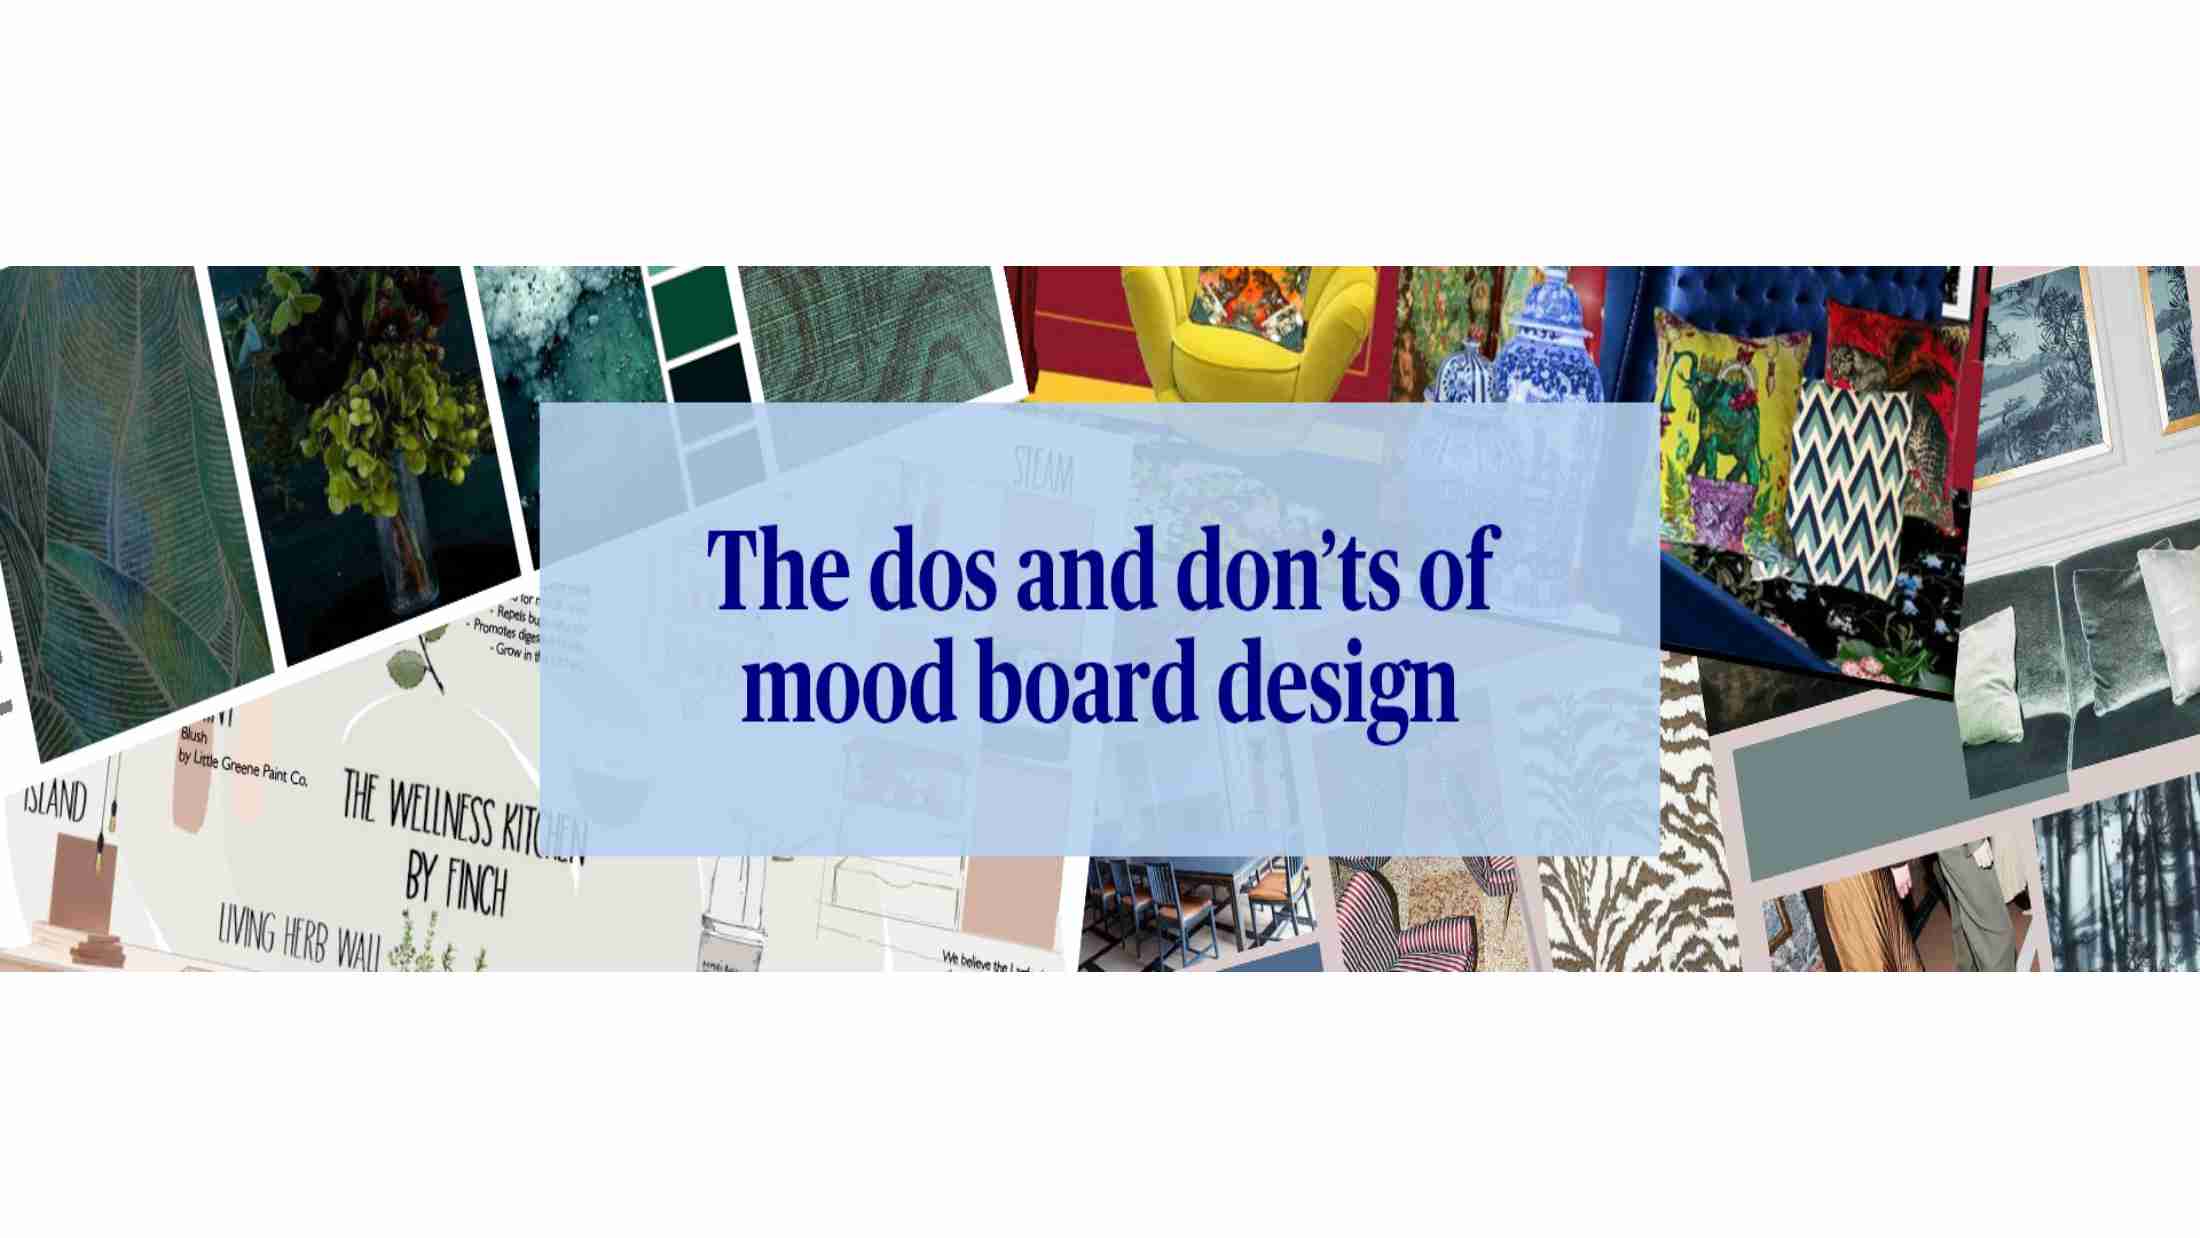 The dos and don'ts of mood board design